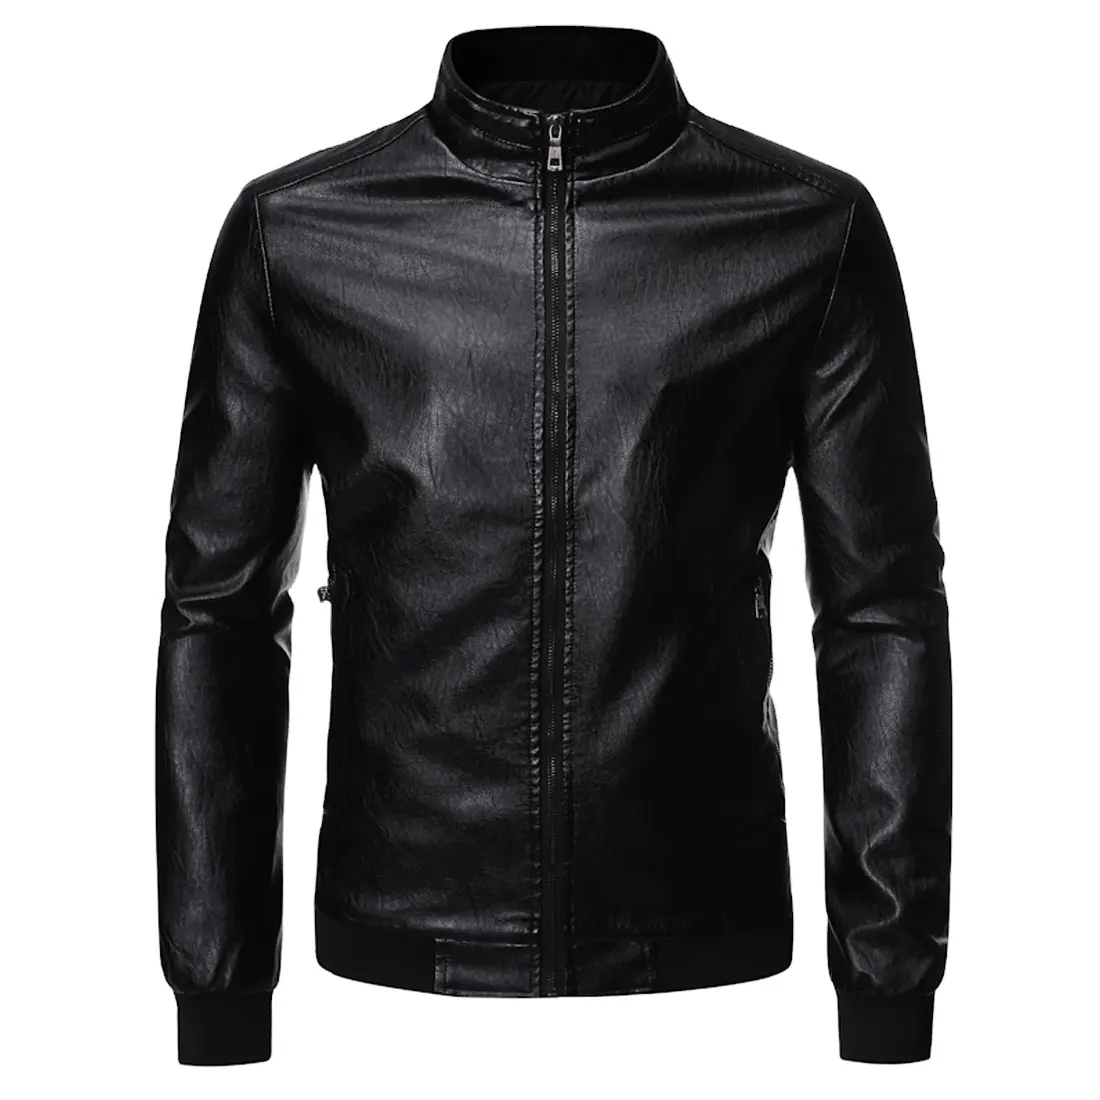 Hot Selling Product Best Winter Men's Slim Leather Jackets Customized Design